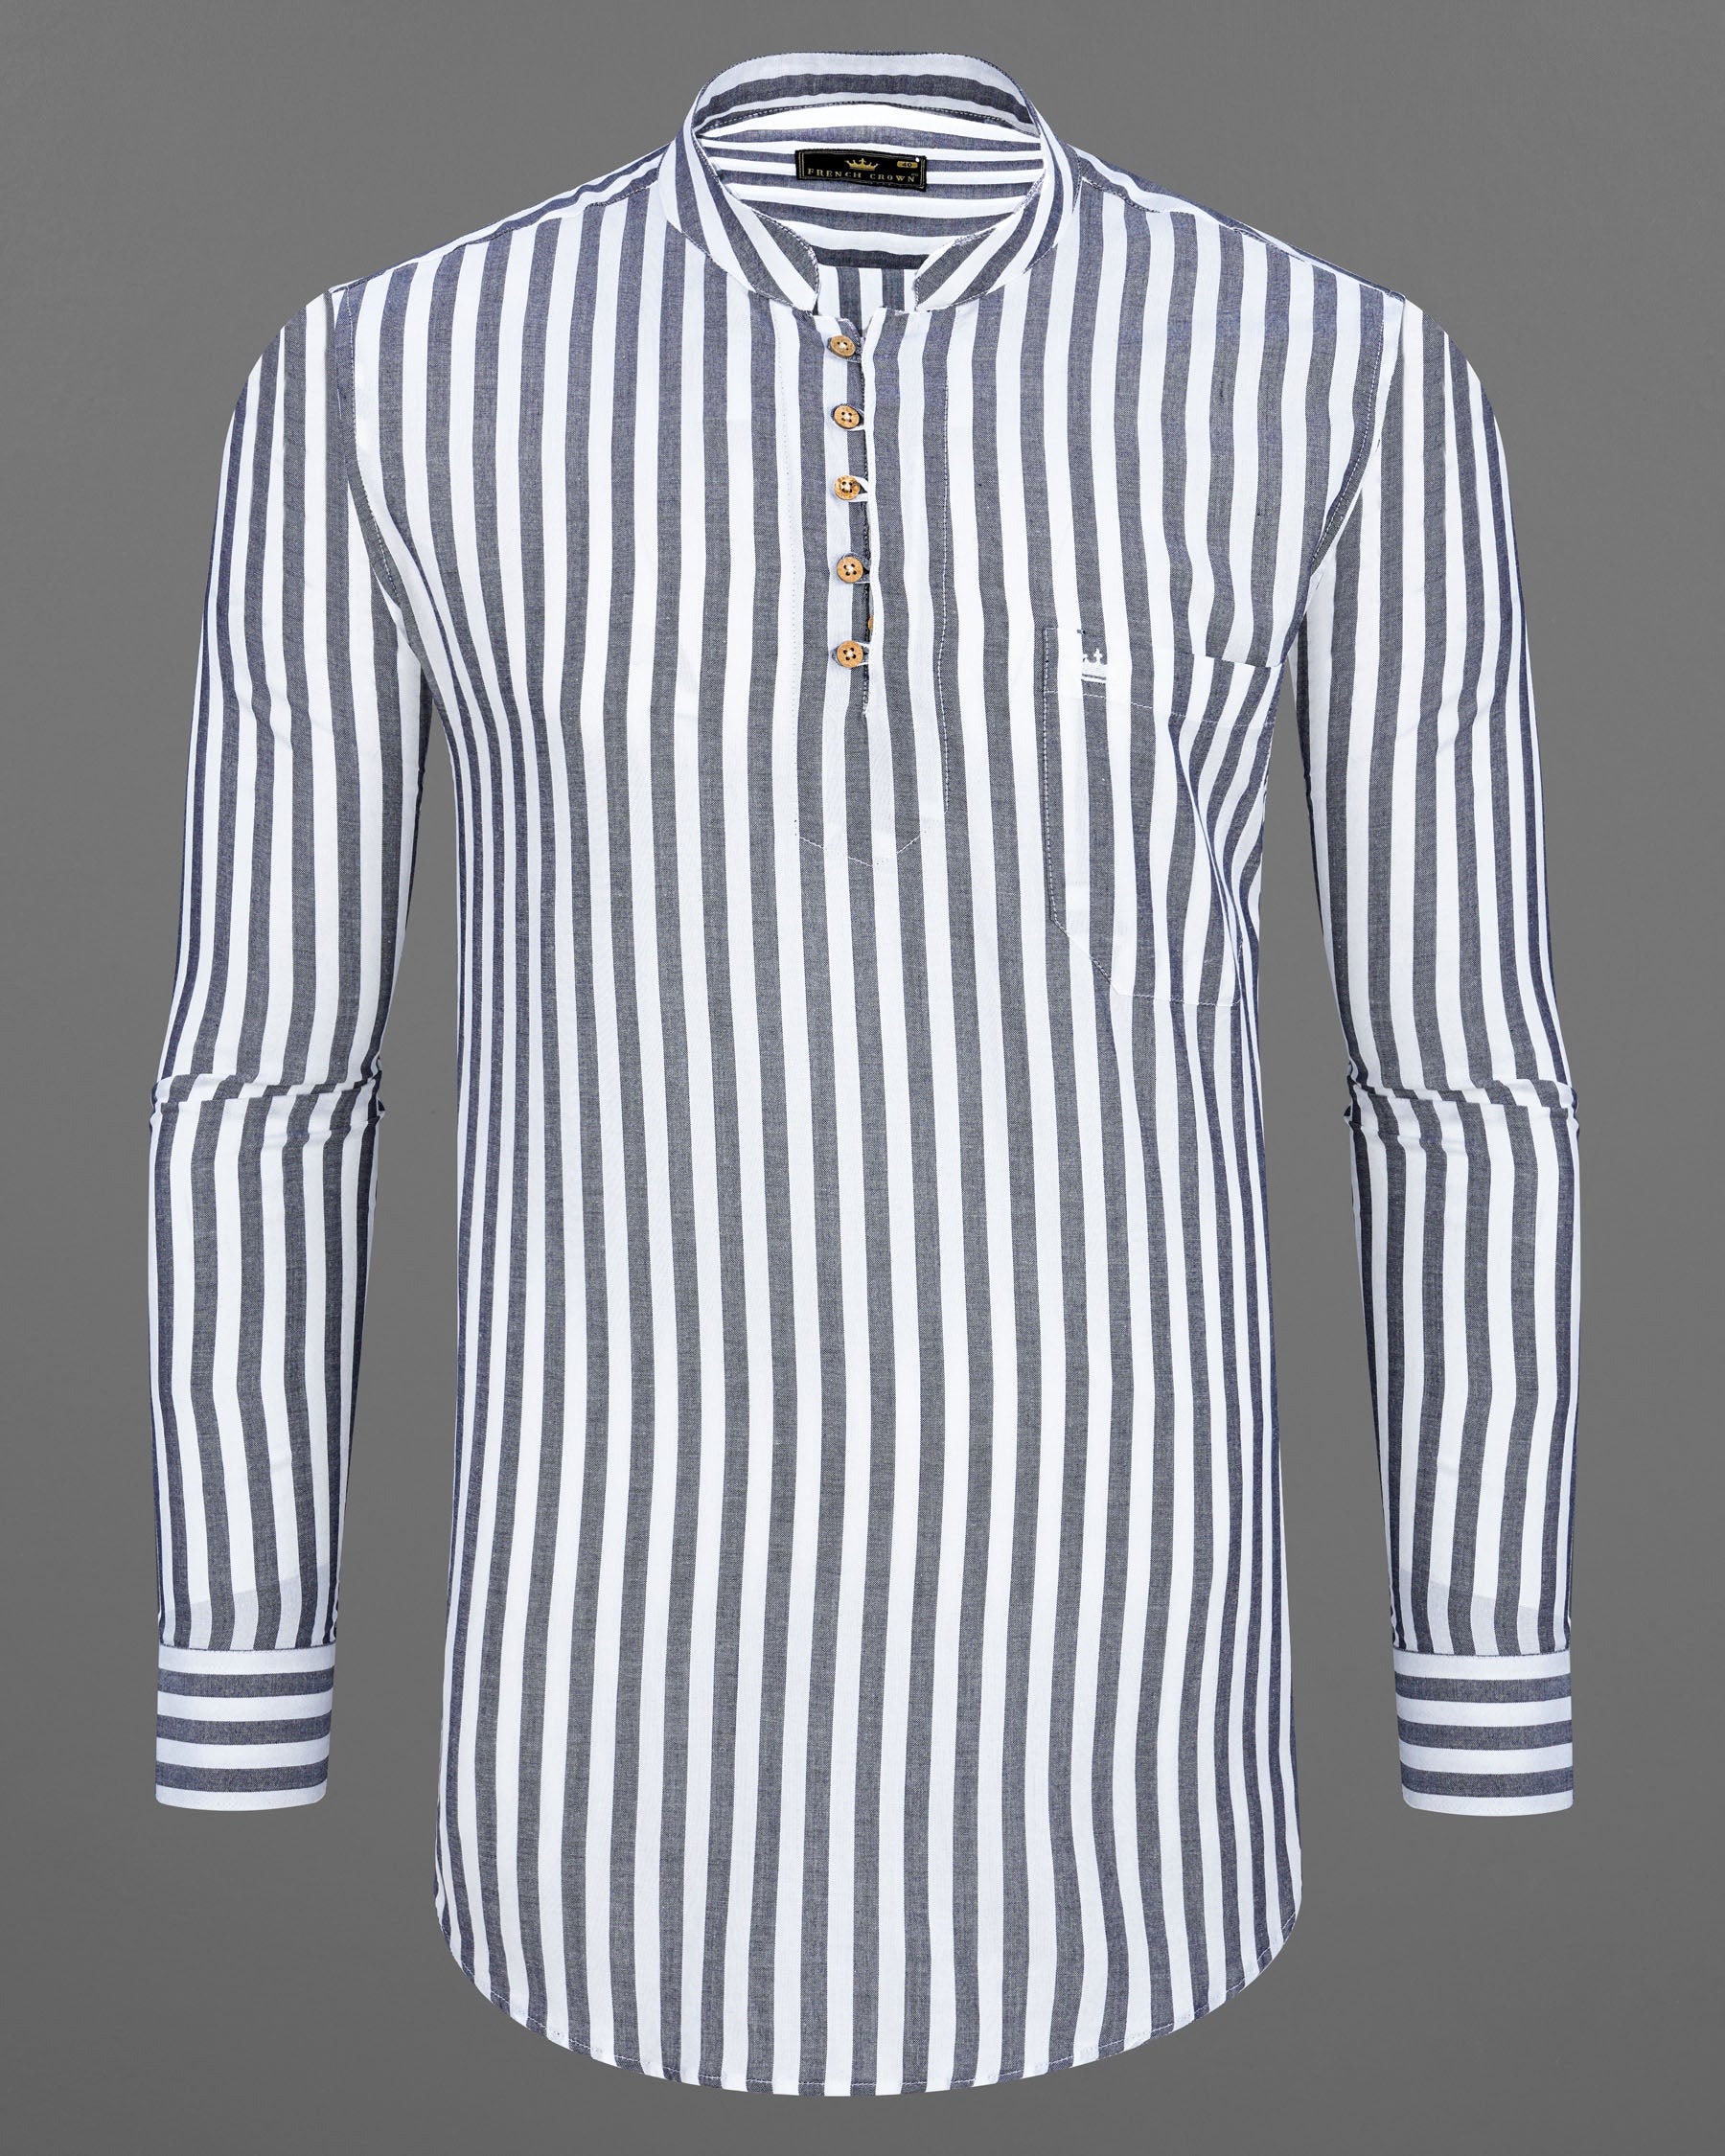 Bright White With Kimberly Gray Striped Premium Tencel Kurta Shirt 7798-KS-38, 7798-KS-H-38, 7798-KS-39,7798-KS-H-39, 7798-KS-40, 7798-KS-H-40, 7798-KS-42, 7798-KS-H-42, 7798-KS-44, 7798-KS-H-44, 7798-KS-46, 7798-KS-H-46, 7798-KS-48, 7798-KS-H-48, 7798-KS-50, 7798-KS-H-50, 7798-KS-52, 7798-KS-H-52